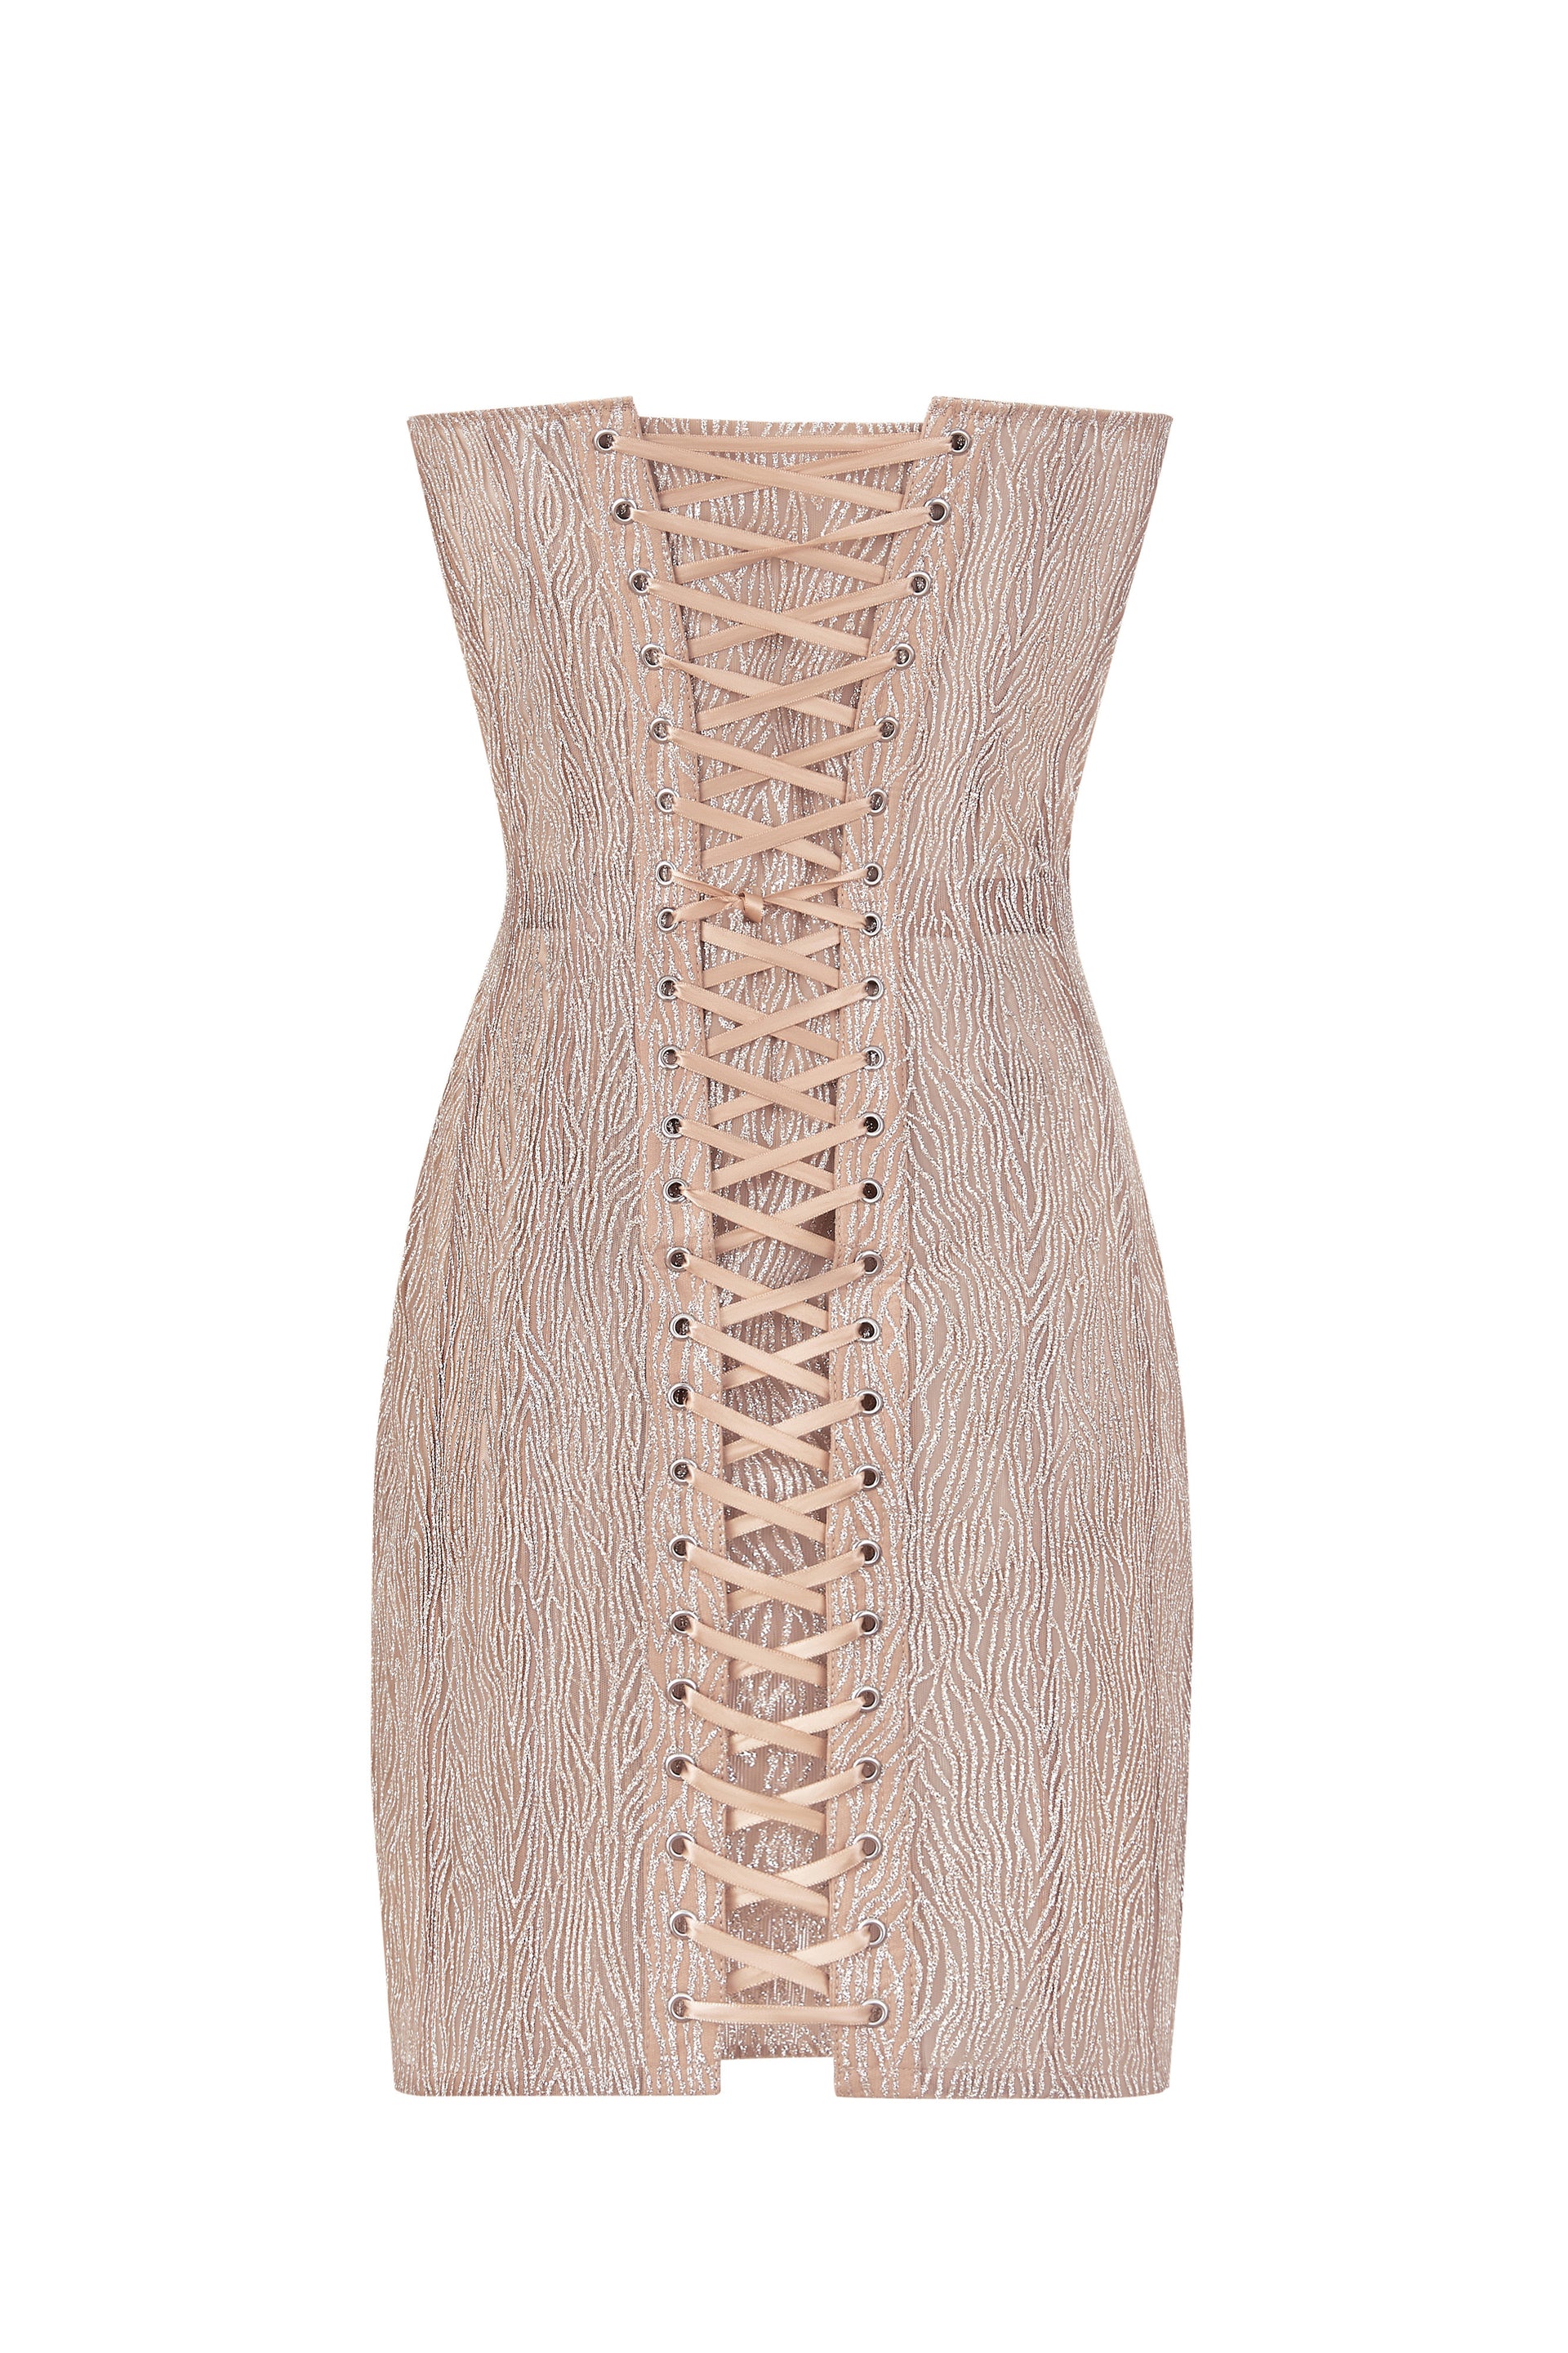 Shiny beige corset dress with cups